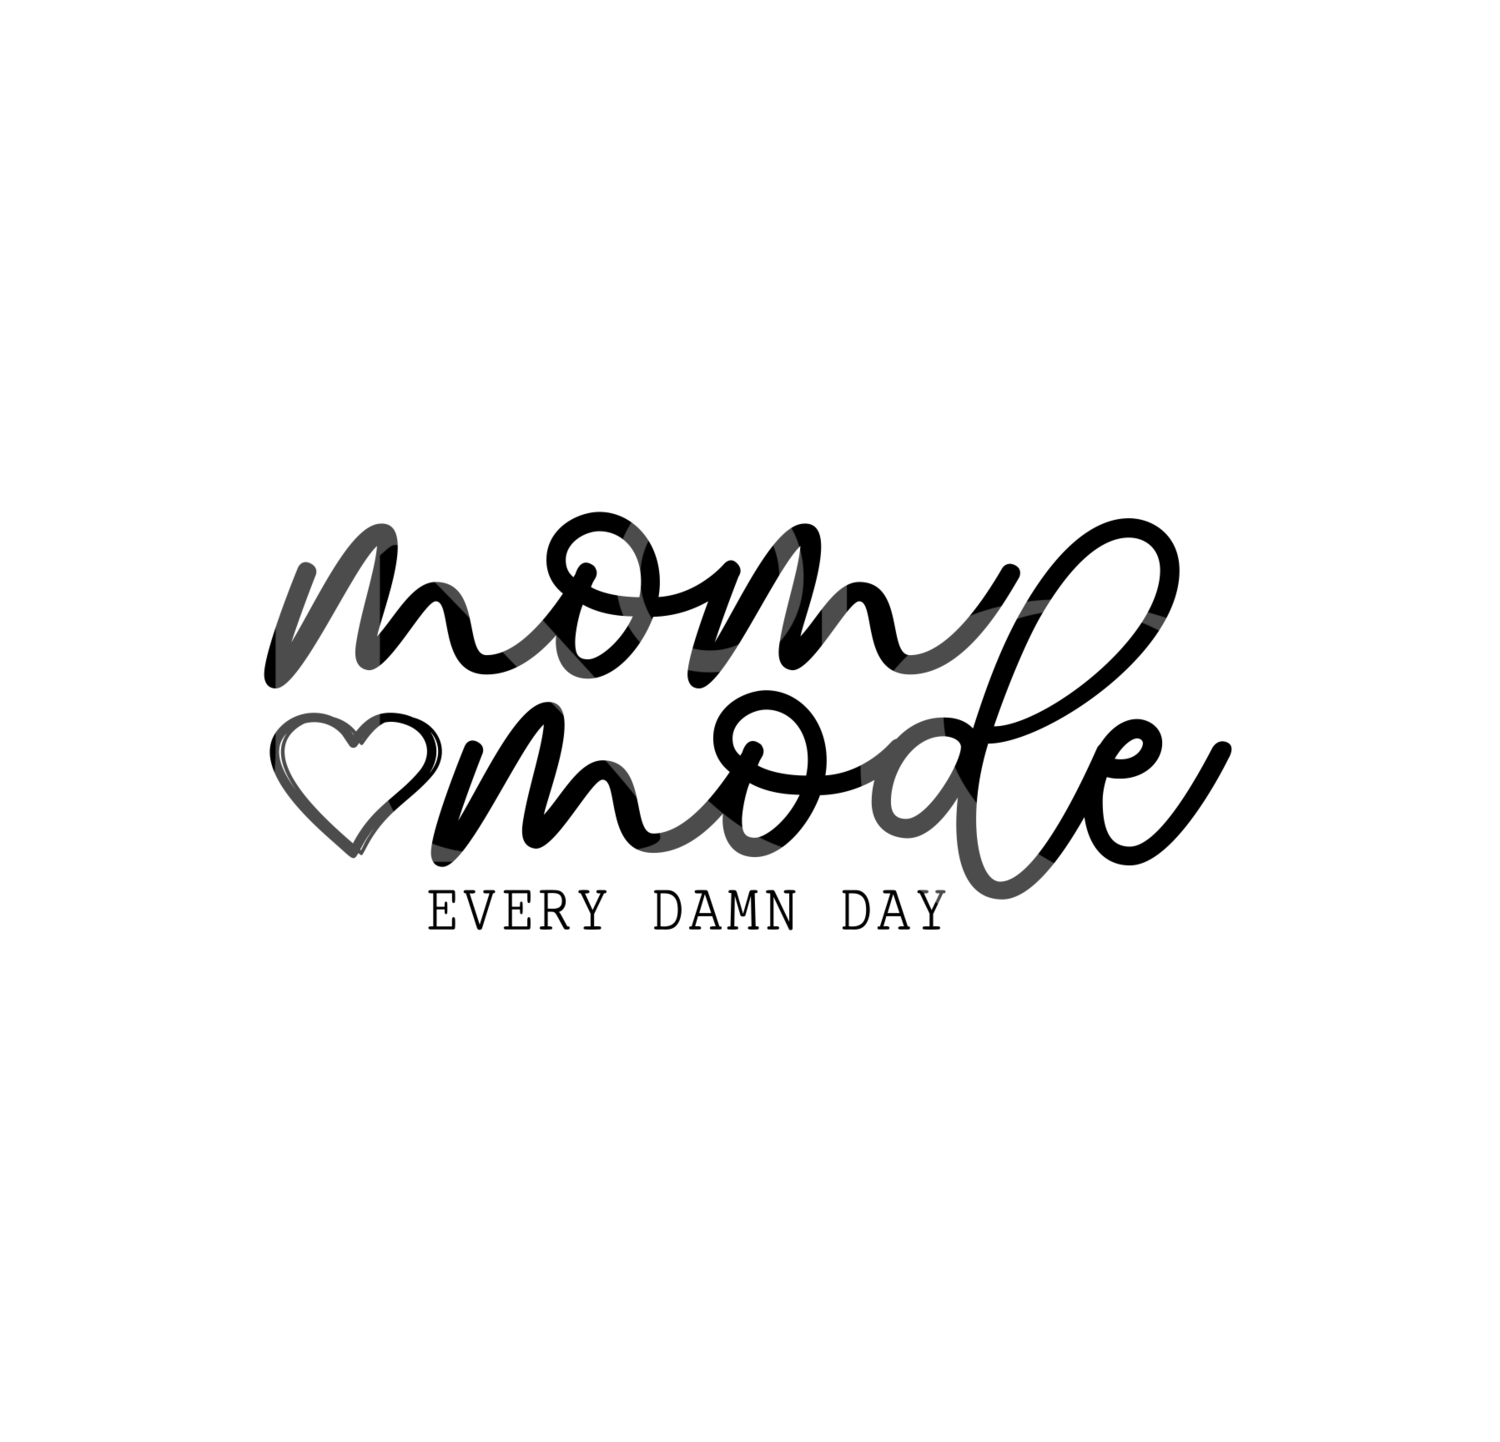 Mom Mode Every Damn Day SVG, Mom SVG, Mothers Day SVG, Adult Humor SVG, Mom DXf, EPS, PNG